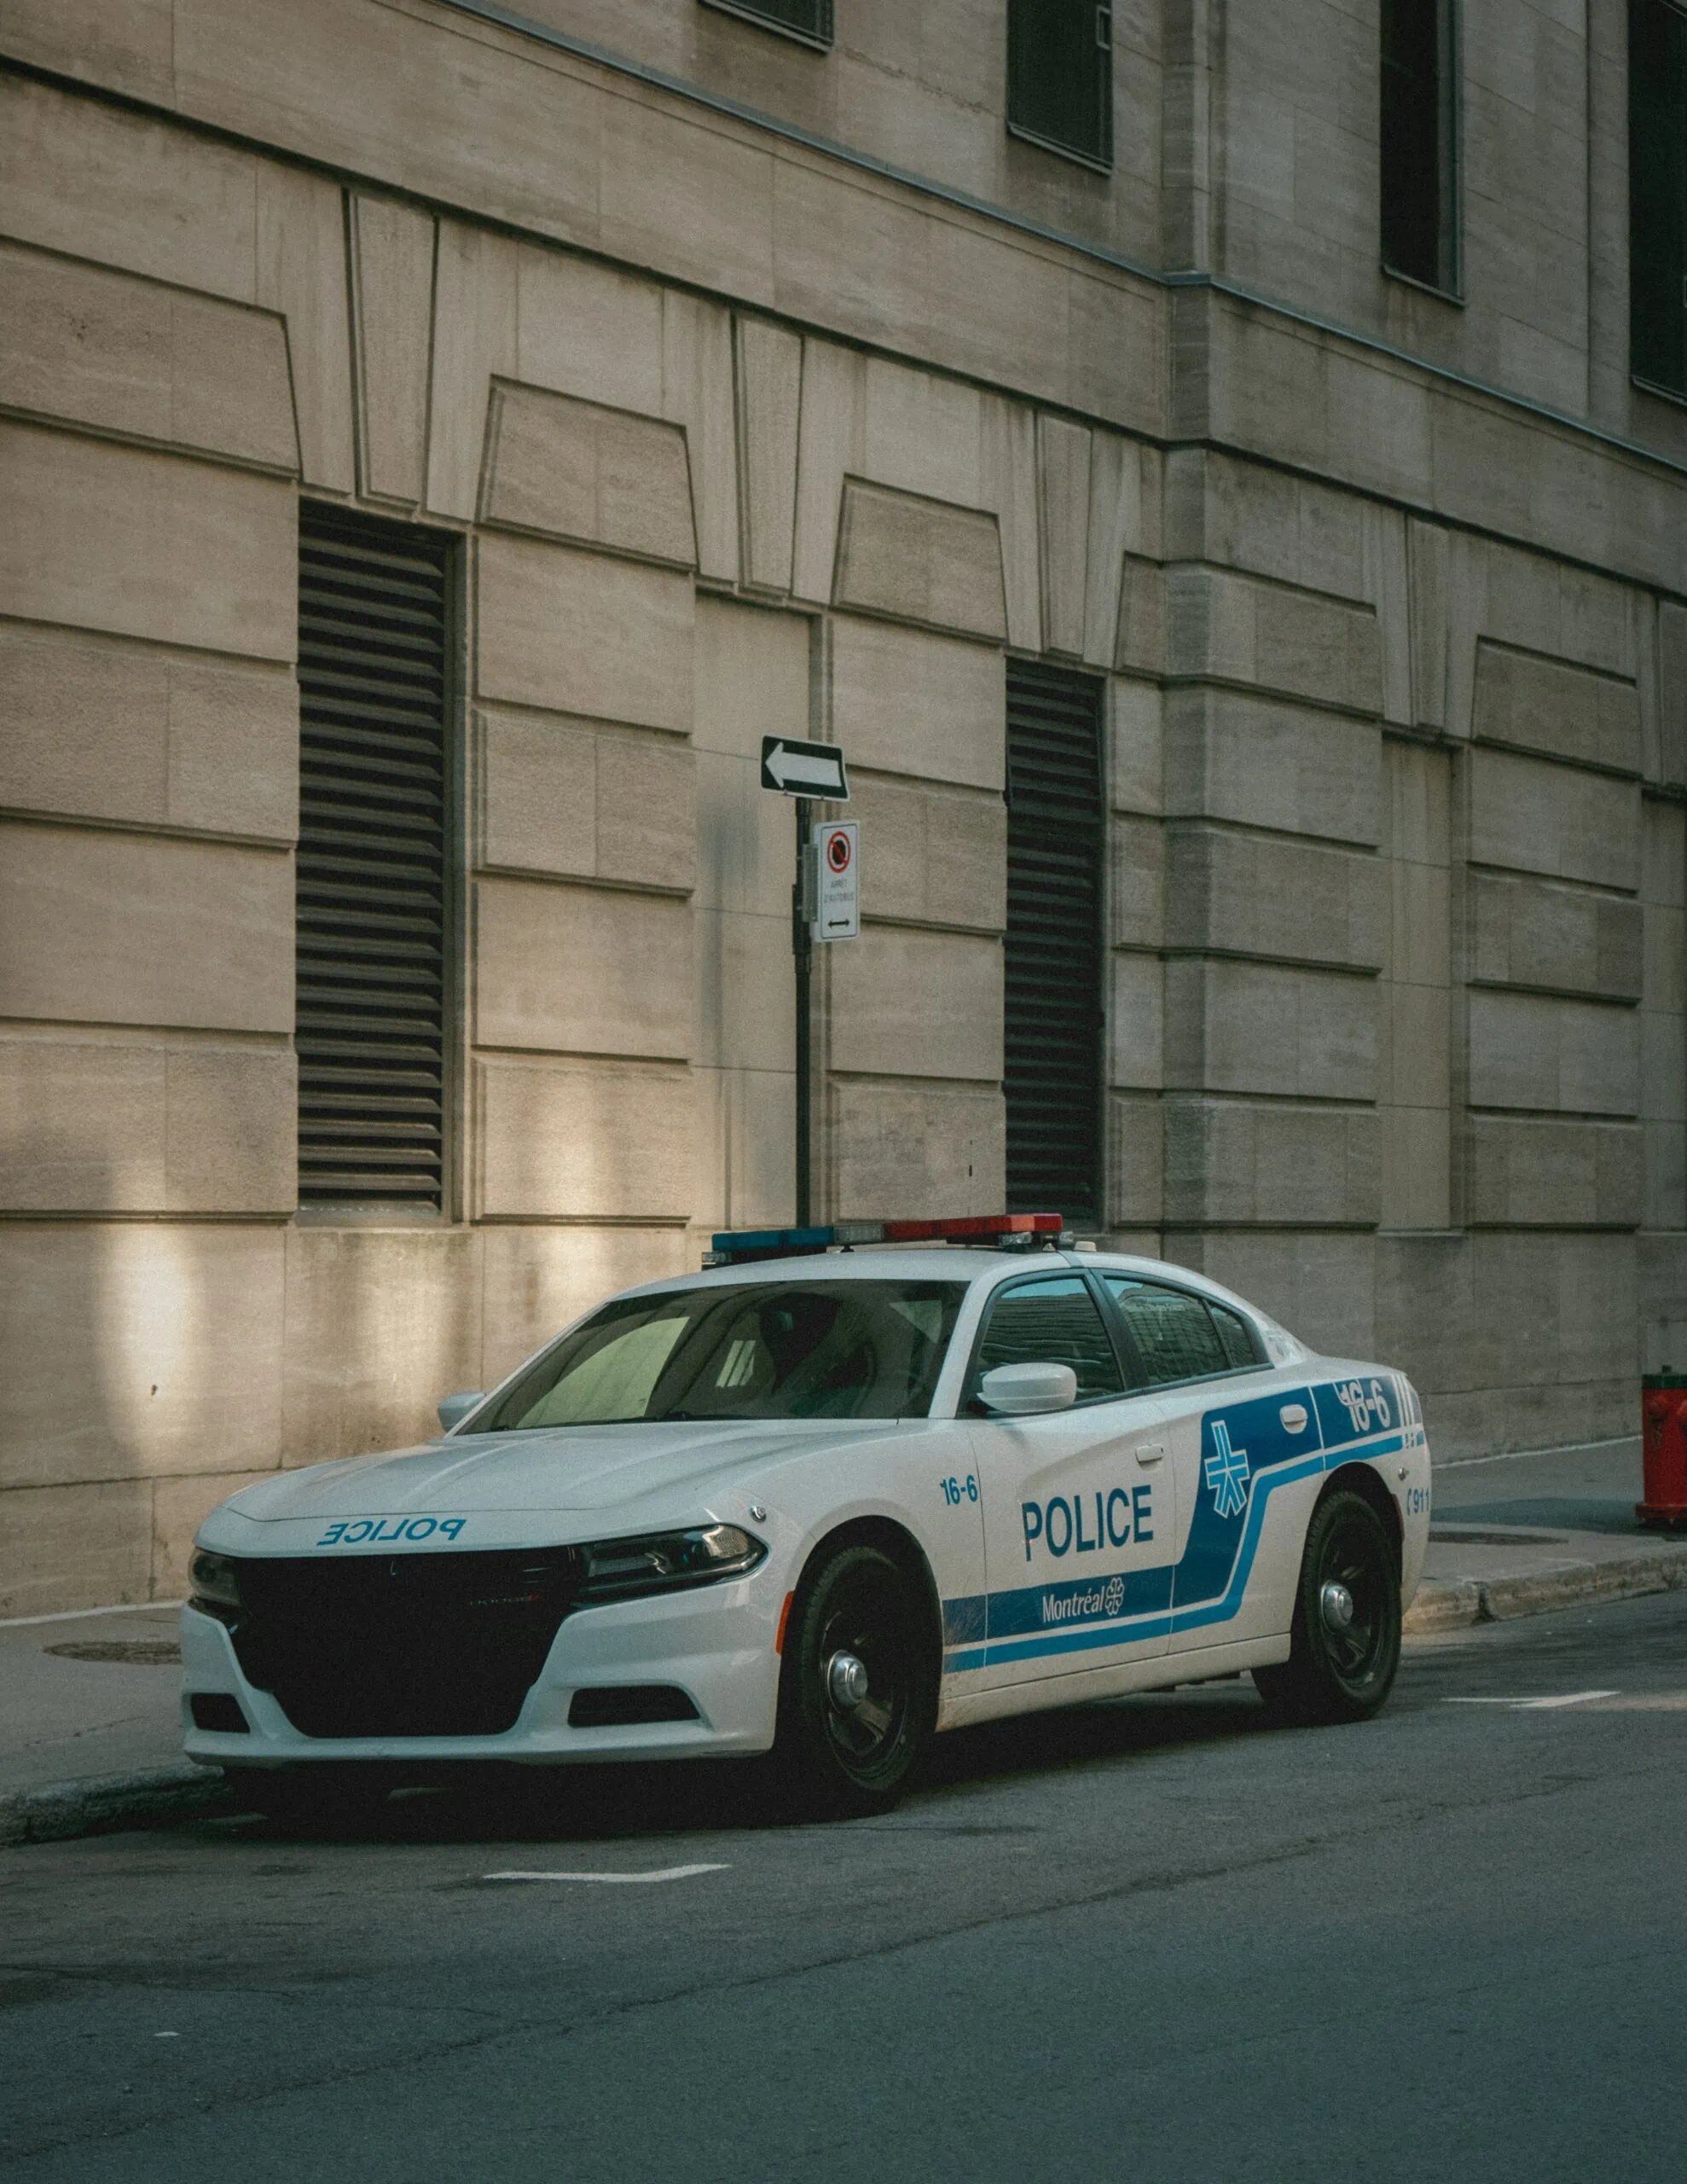 Police car parked, equipped with a police dash camera